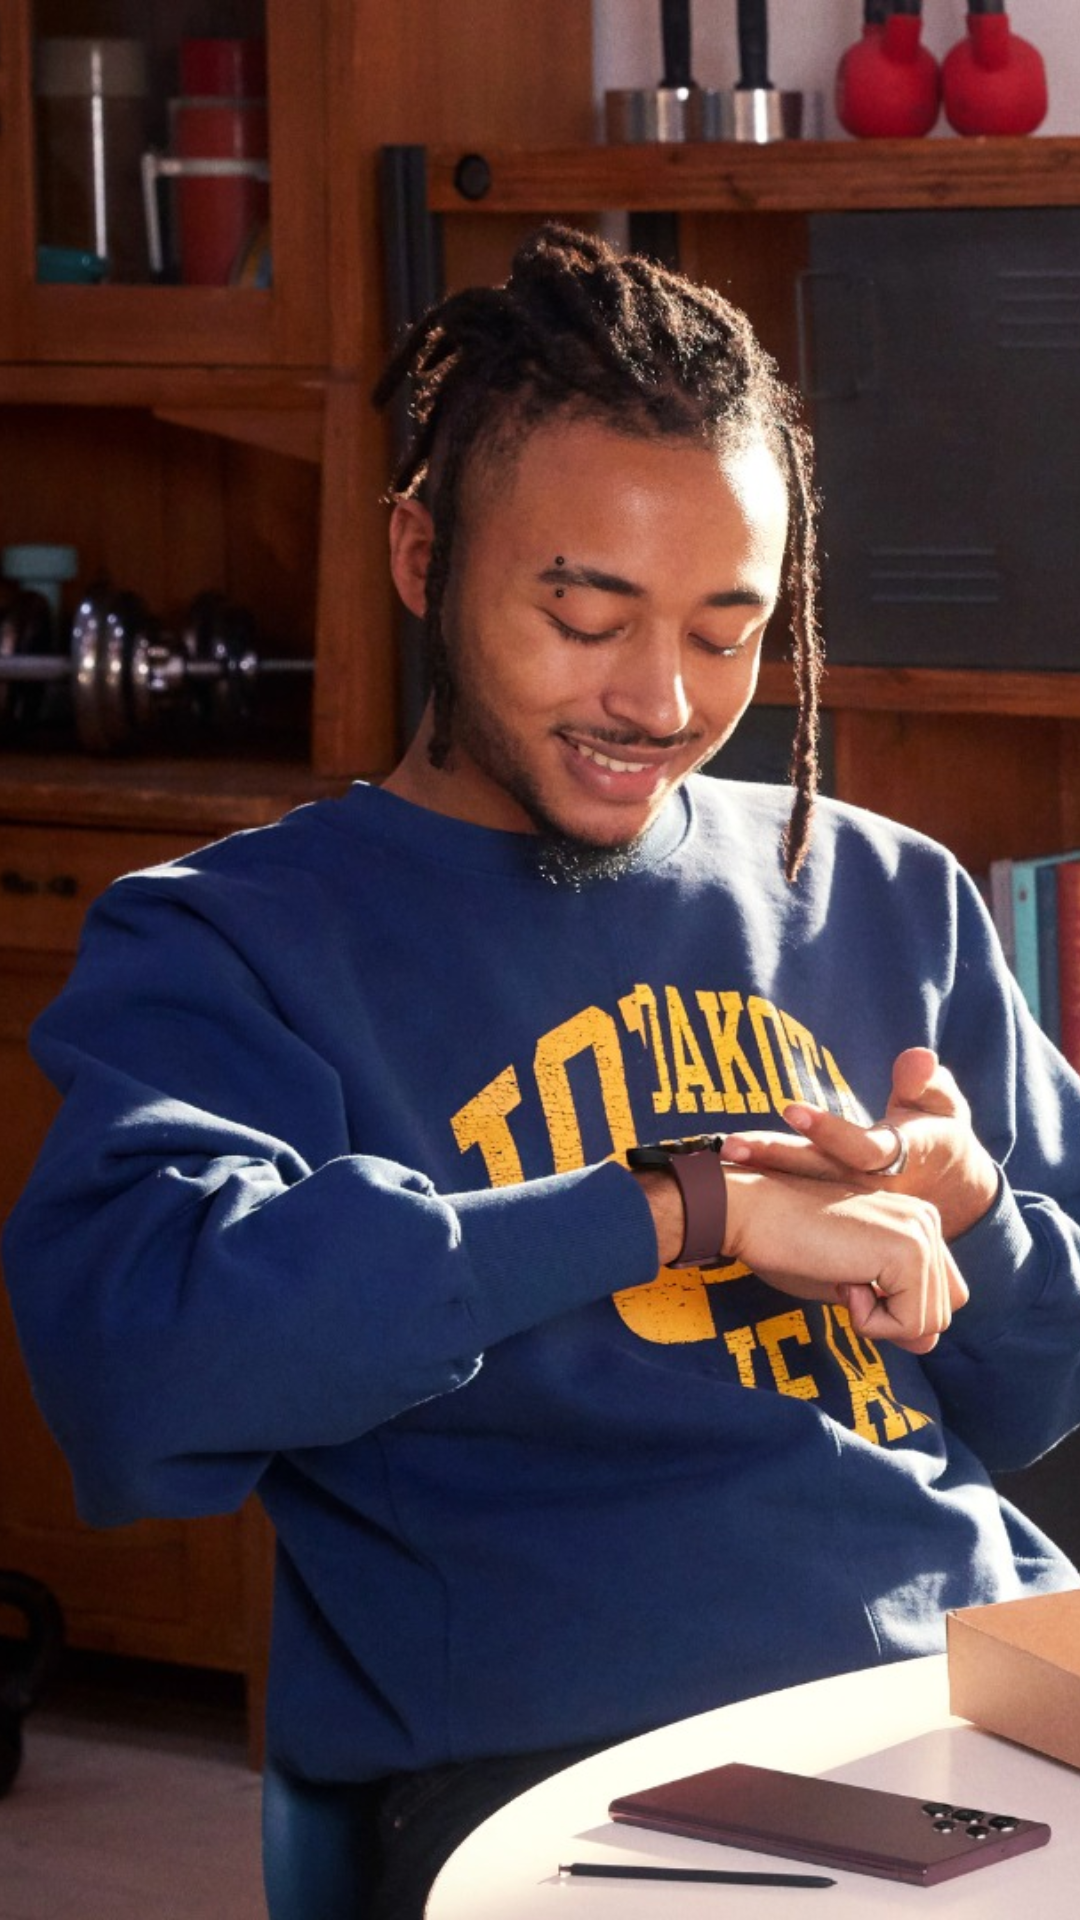 image of a man wearing a blue crewneck sweater looking at a smartwatch